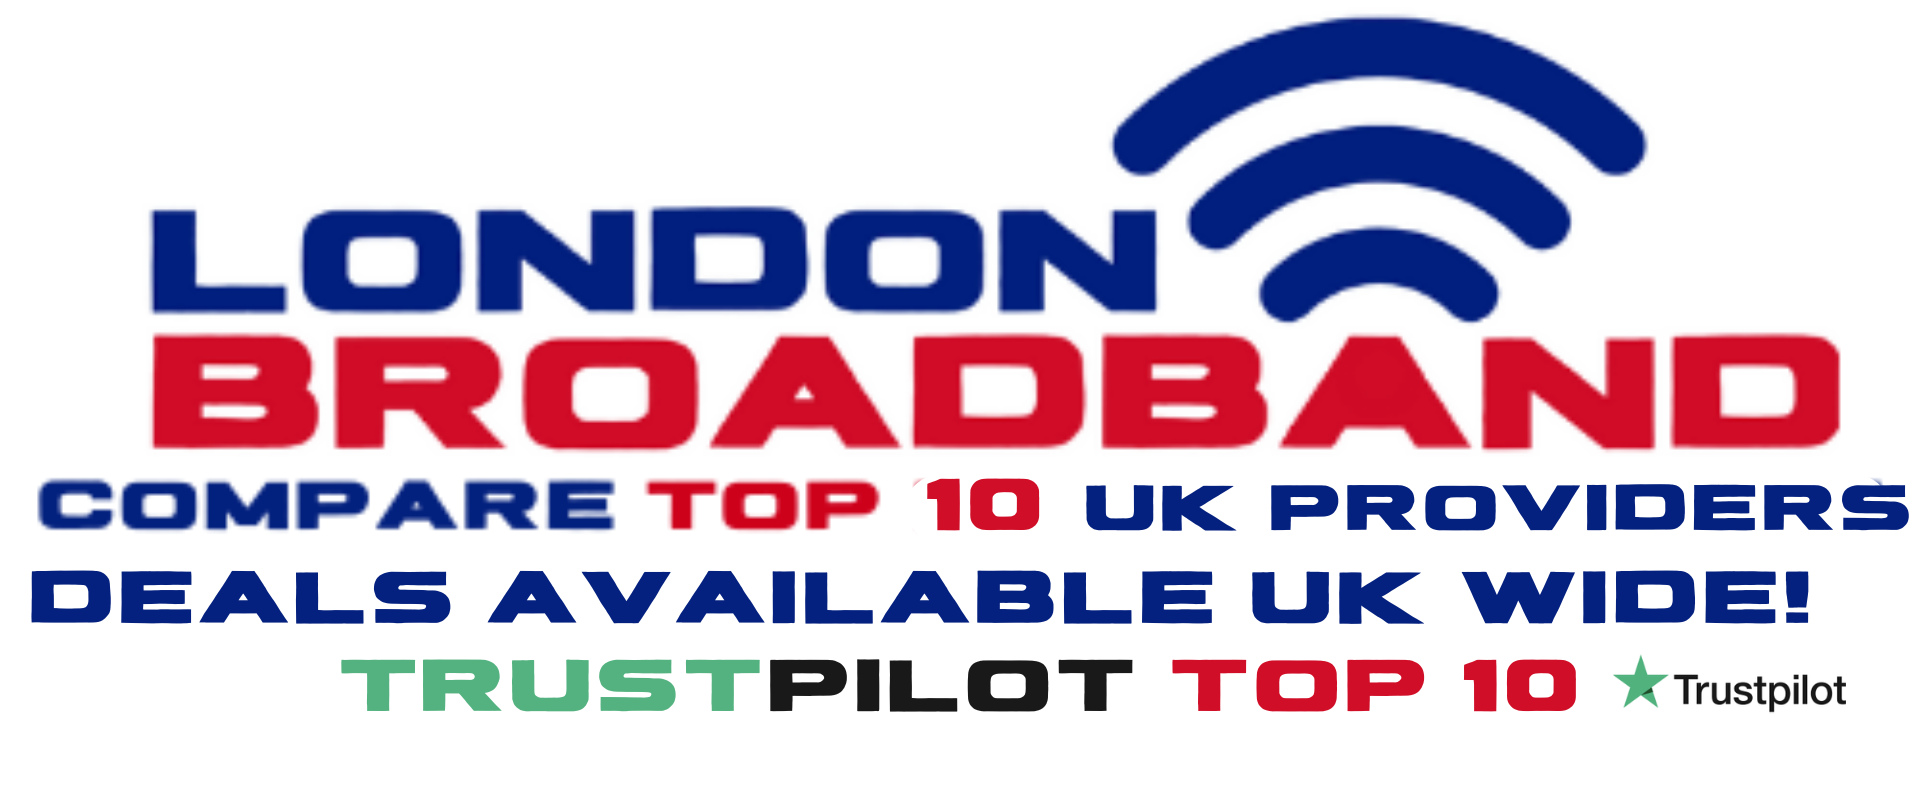 Compare deals at London Broadband and get the lowest prices for internet anywhere in the UK. We aim to help customers find the broadband speed they need.